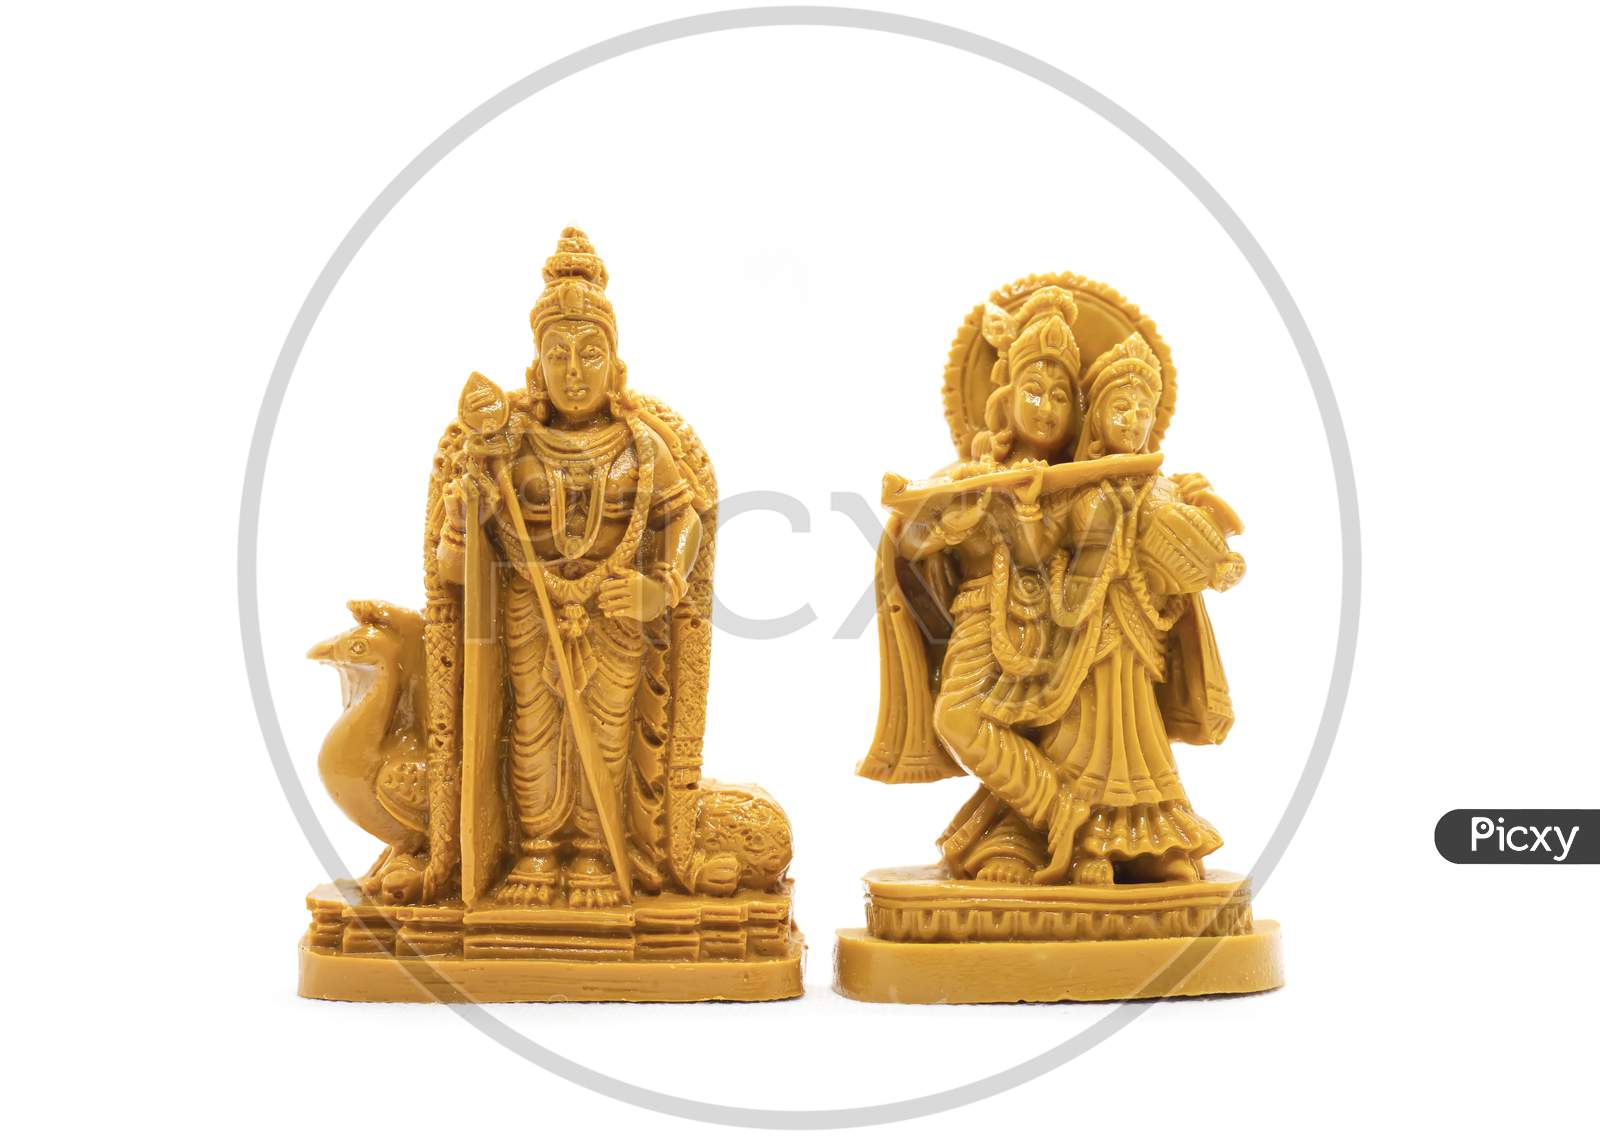 The Hand-Carved Wooden Idol Of Lord Murugan With Radha Krishna Is Isolated On A White Background